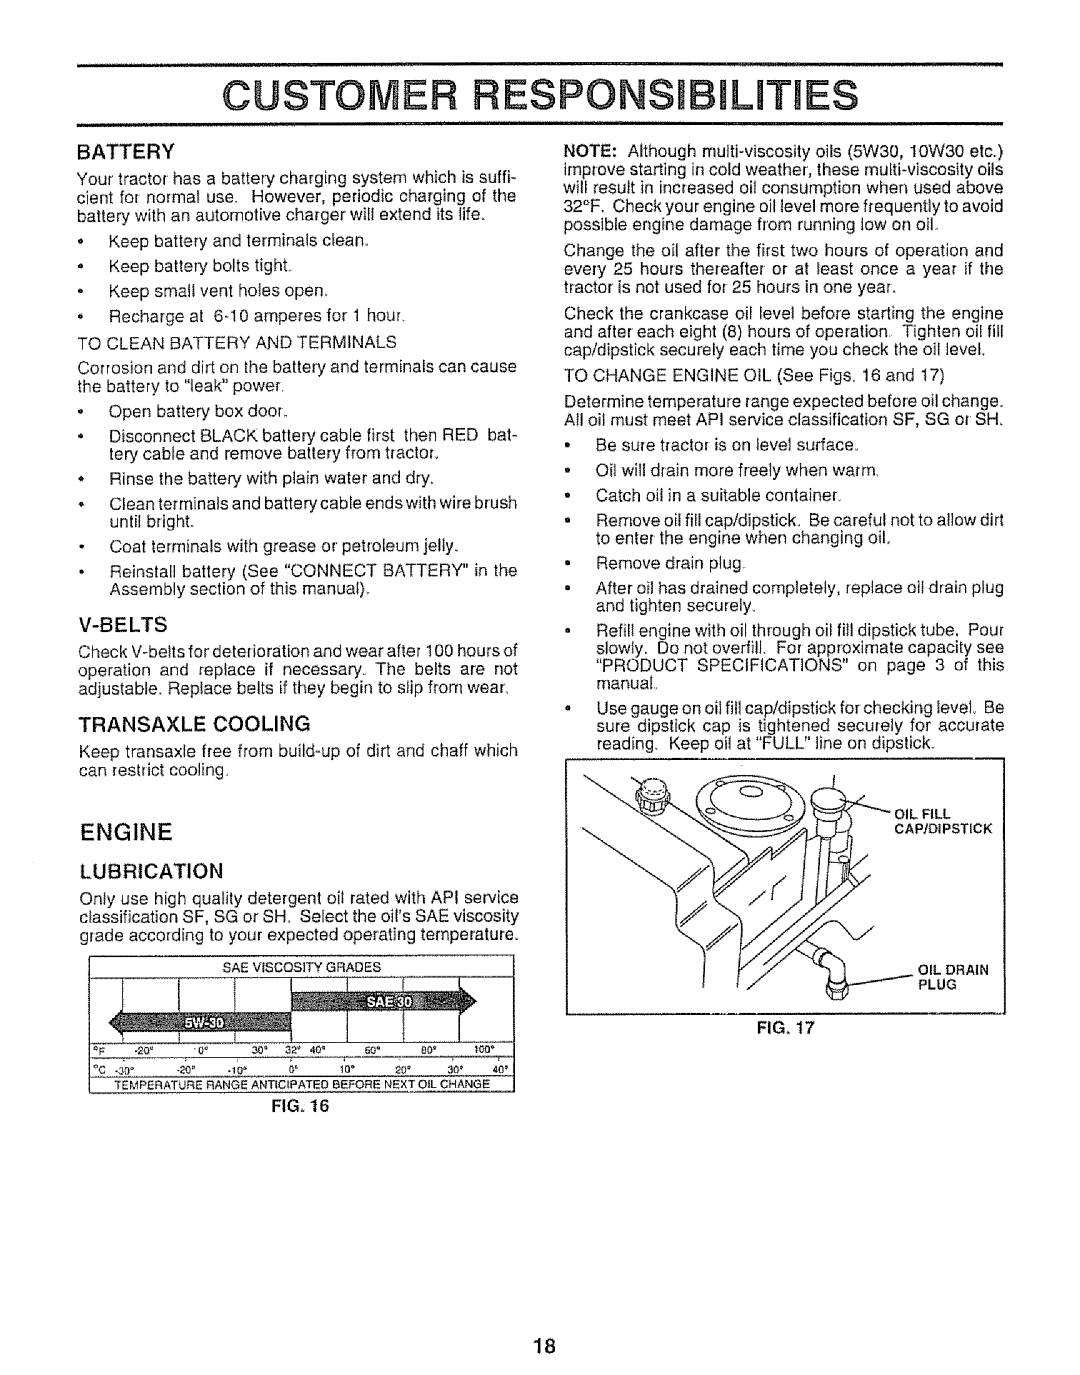 Sears 917.25953 owner manual CUSTOMER ESPO ILmTIES, Engine, Battery, V-Belts, Transaxle Cooling 